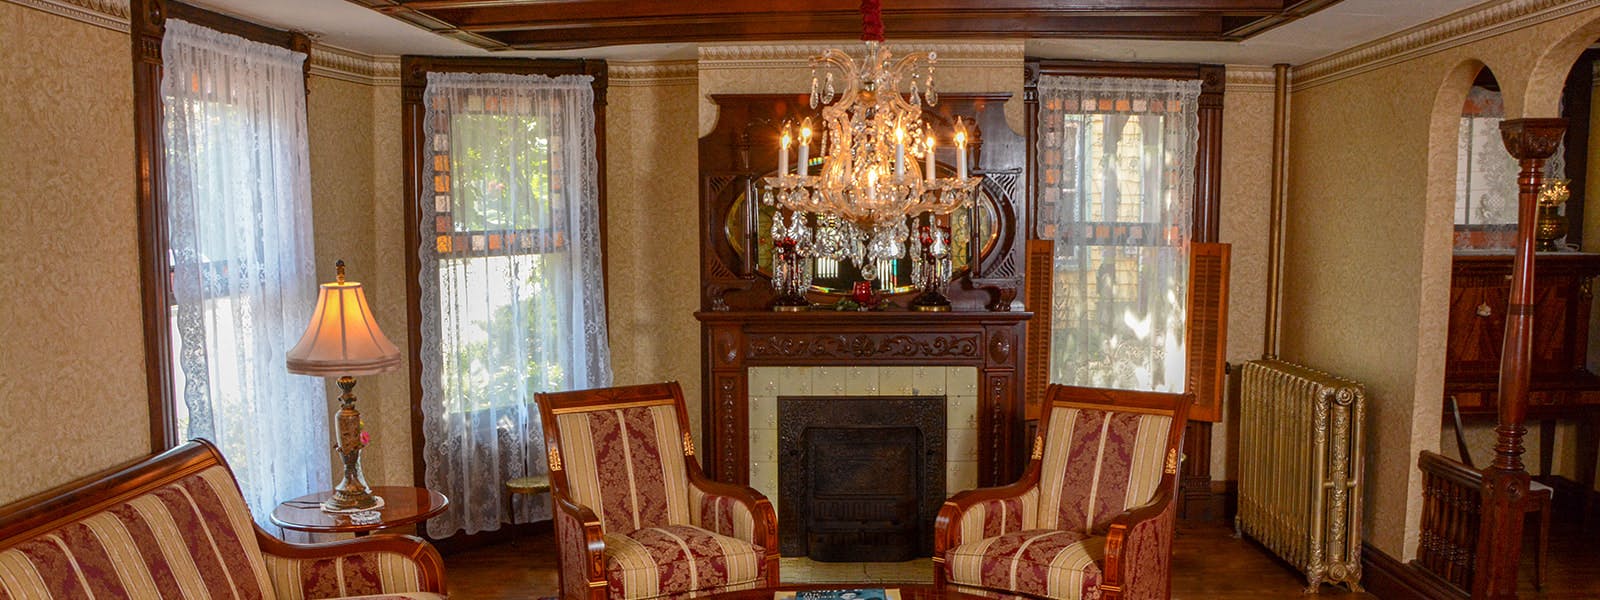 Front parlor showing fireplace.